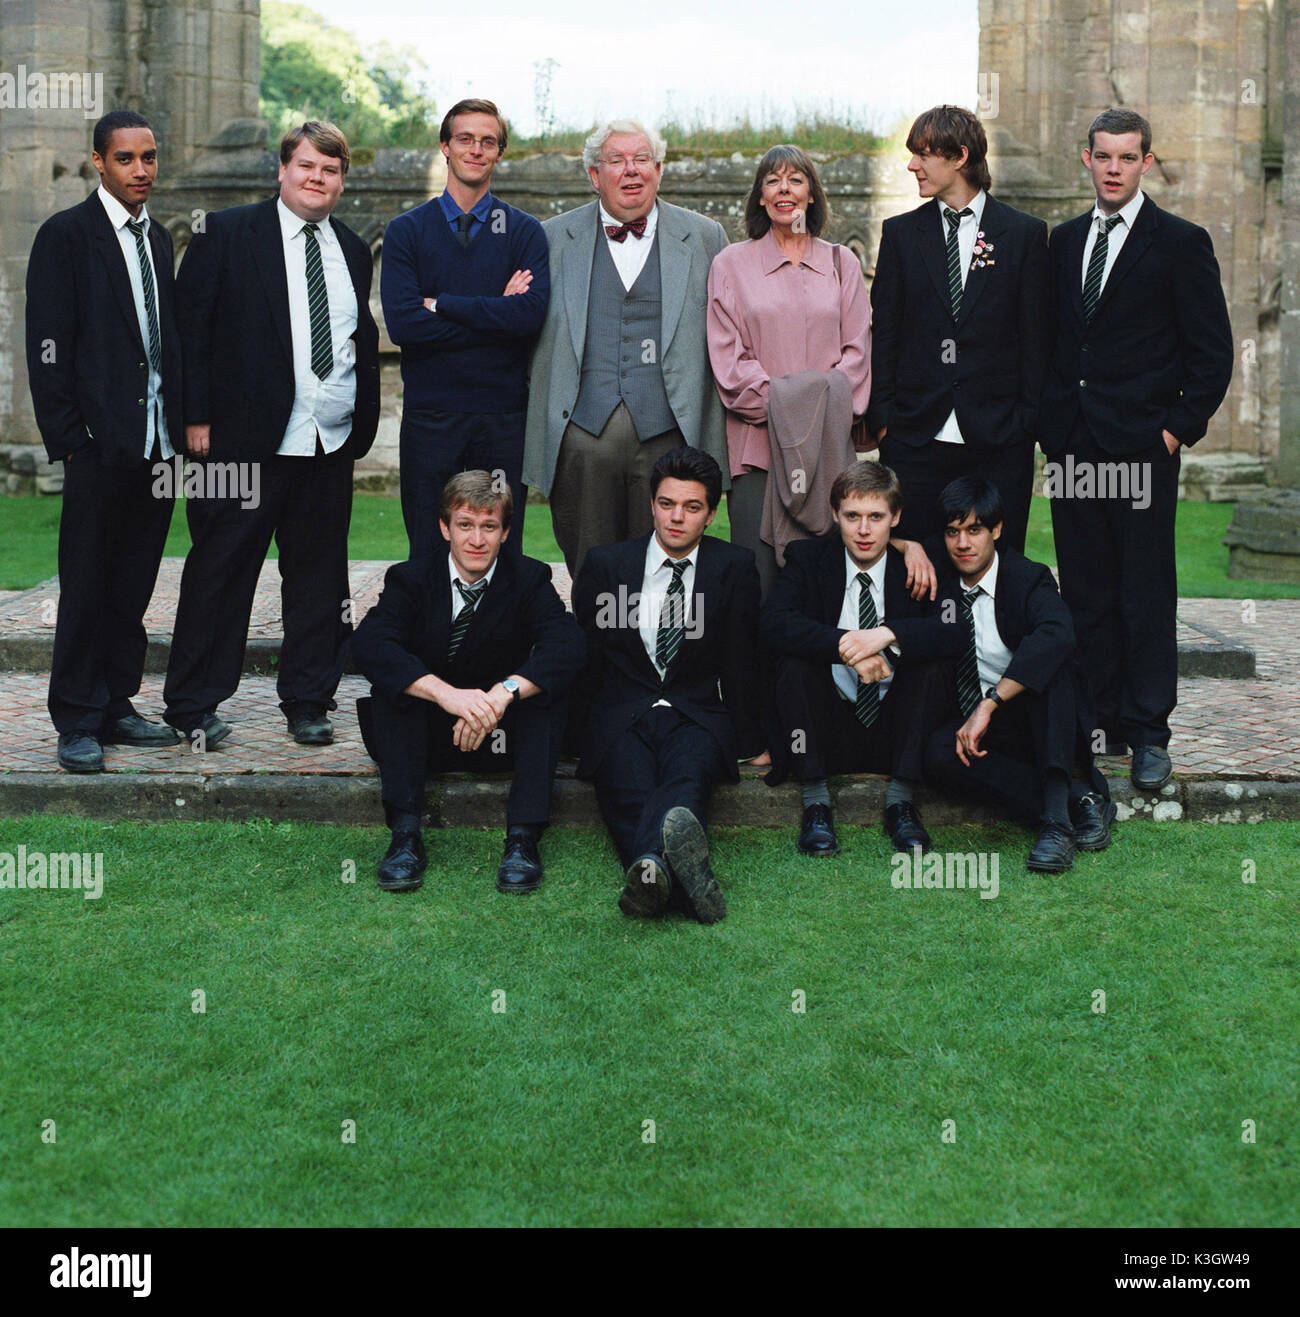 THE HISTORY BOYS Top L to R: Samuel Anderson as CROWTHER, James Corden as TIMMS, Stephen Campbell Moore as IRWIN, Richard Griffiths as HECTOR, Frances de la Tour as MRS LINTOTT, Andrew Knott as LOCKWOOD, Russell Tovey as RUDGE Bottom L to R: Jamie Parker as SCRIPPS, Dominic Cooper as DAKIN, Samuel Barnett as POSNER, Sacha Dhawan as AKHTAR      Date: 2006 Stock Photo